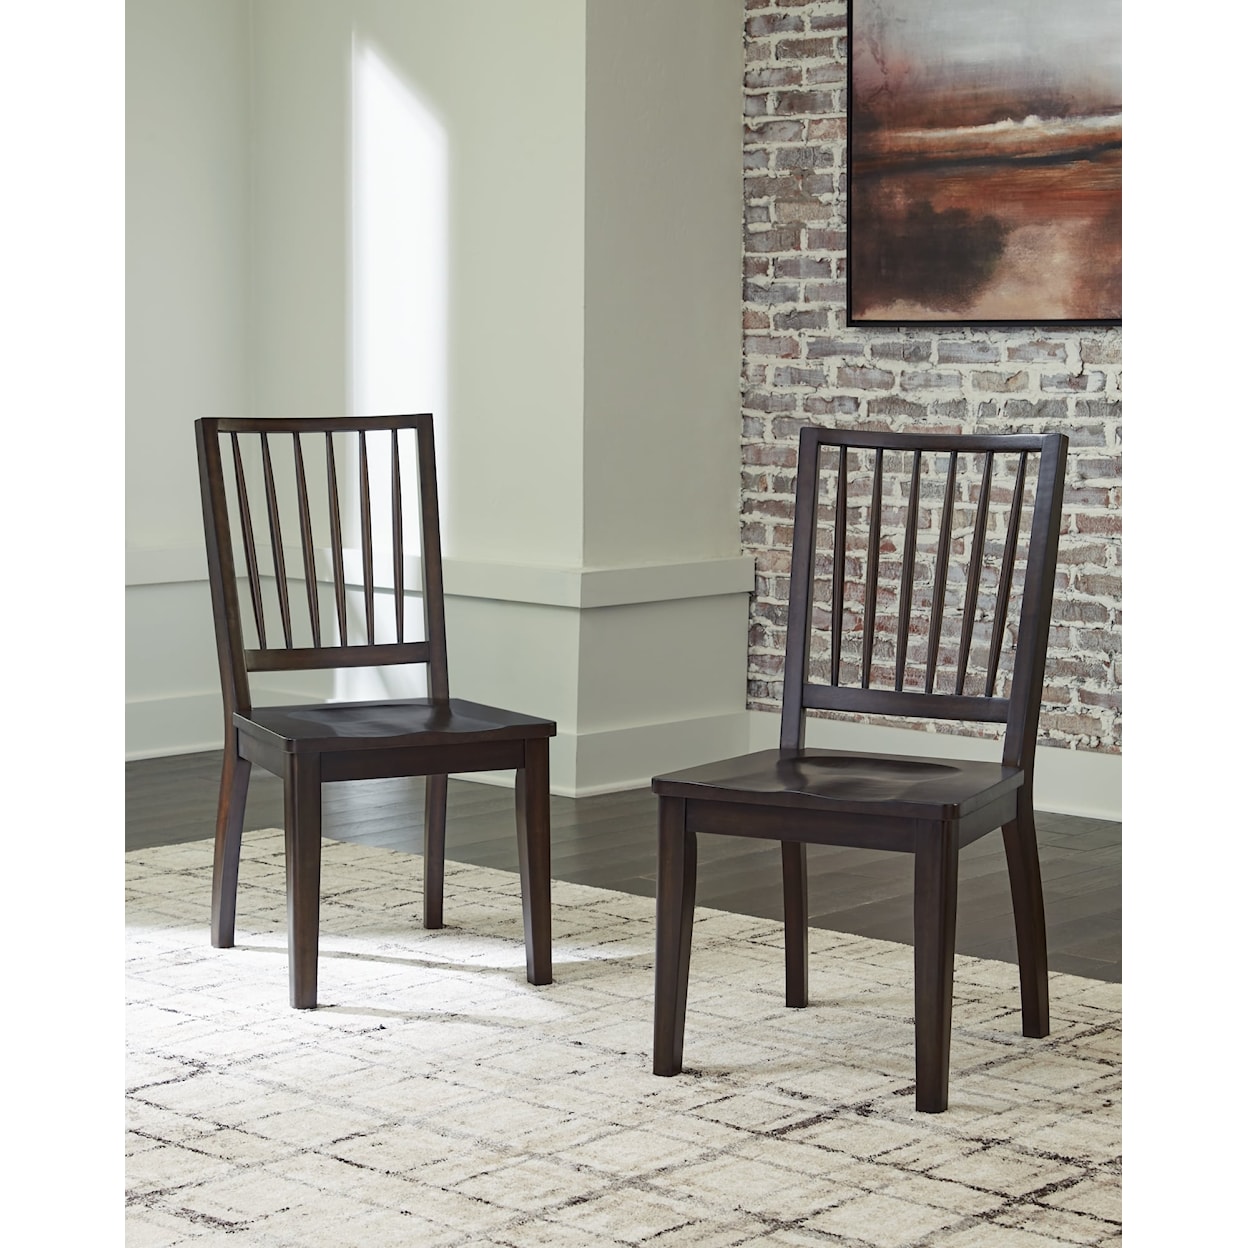 Signature Design by Ashley Furniture Charterton Dining Room Side Chair